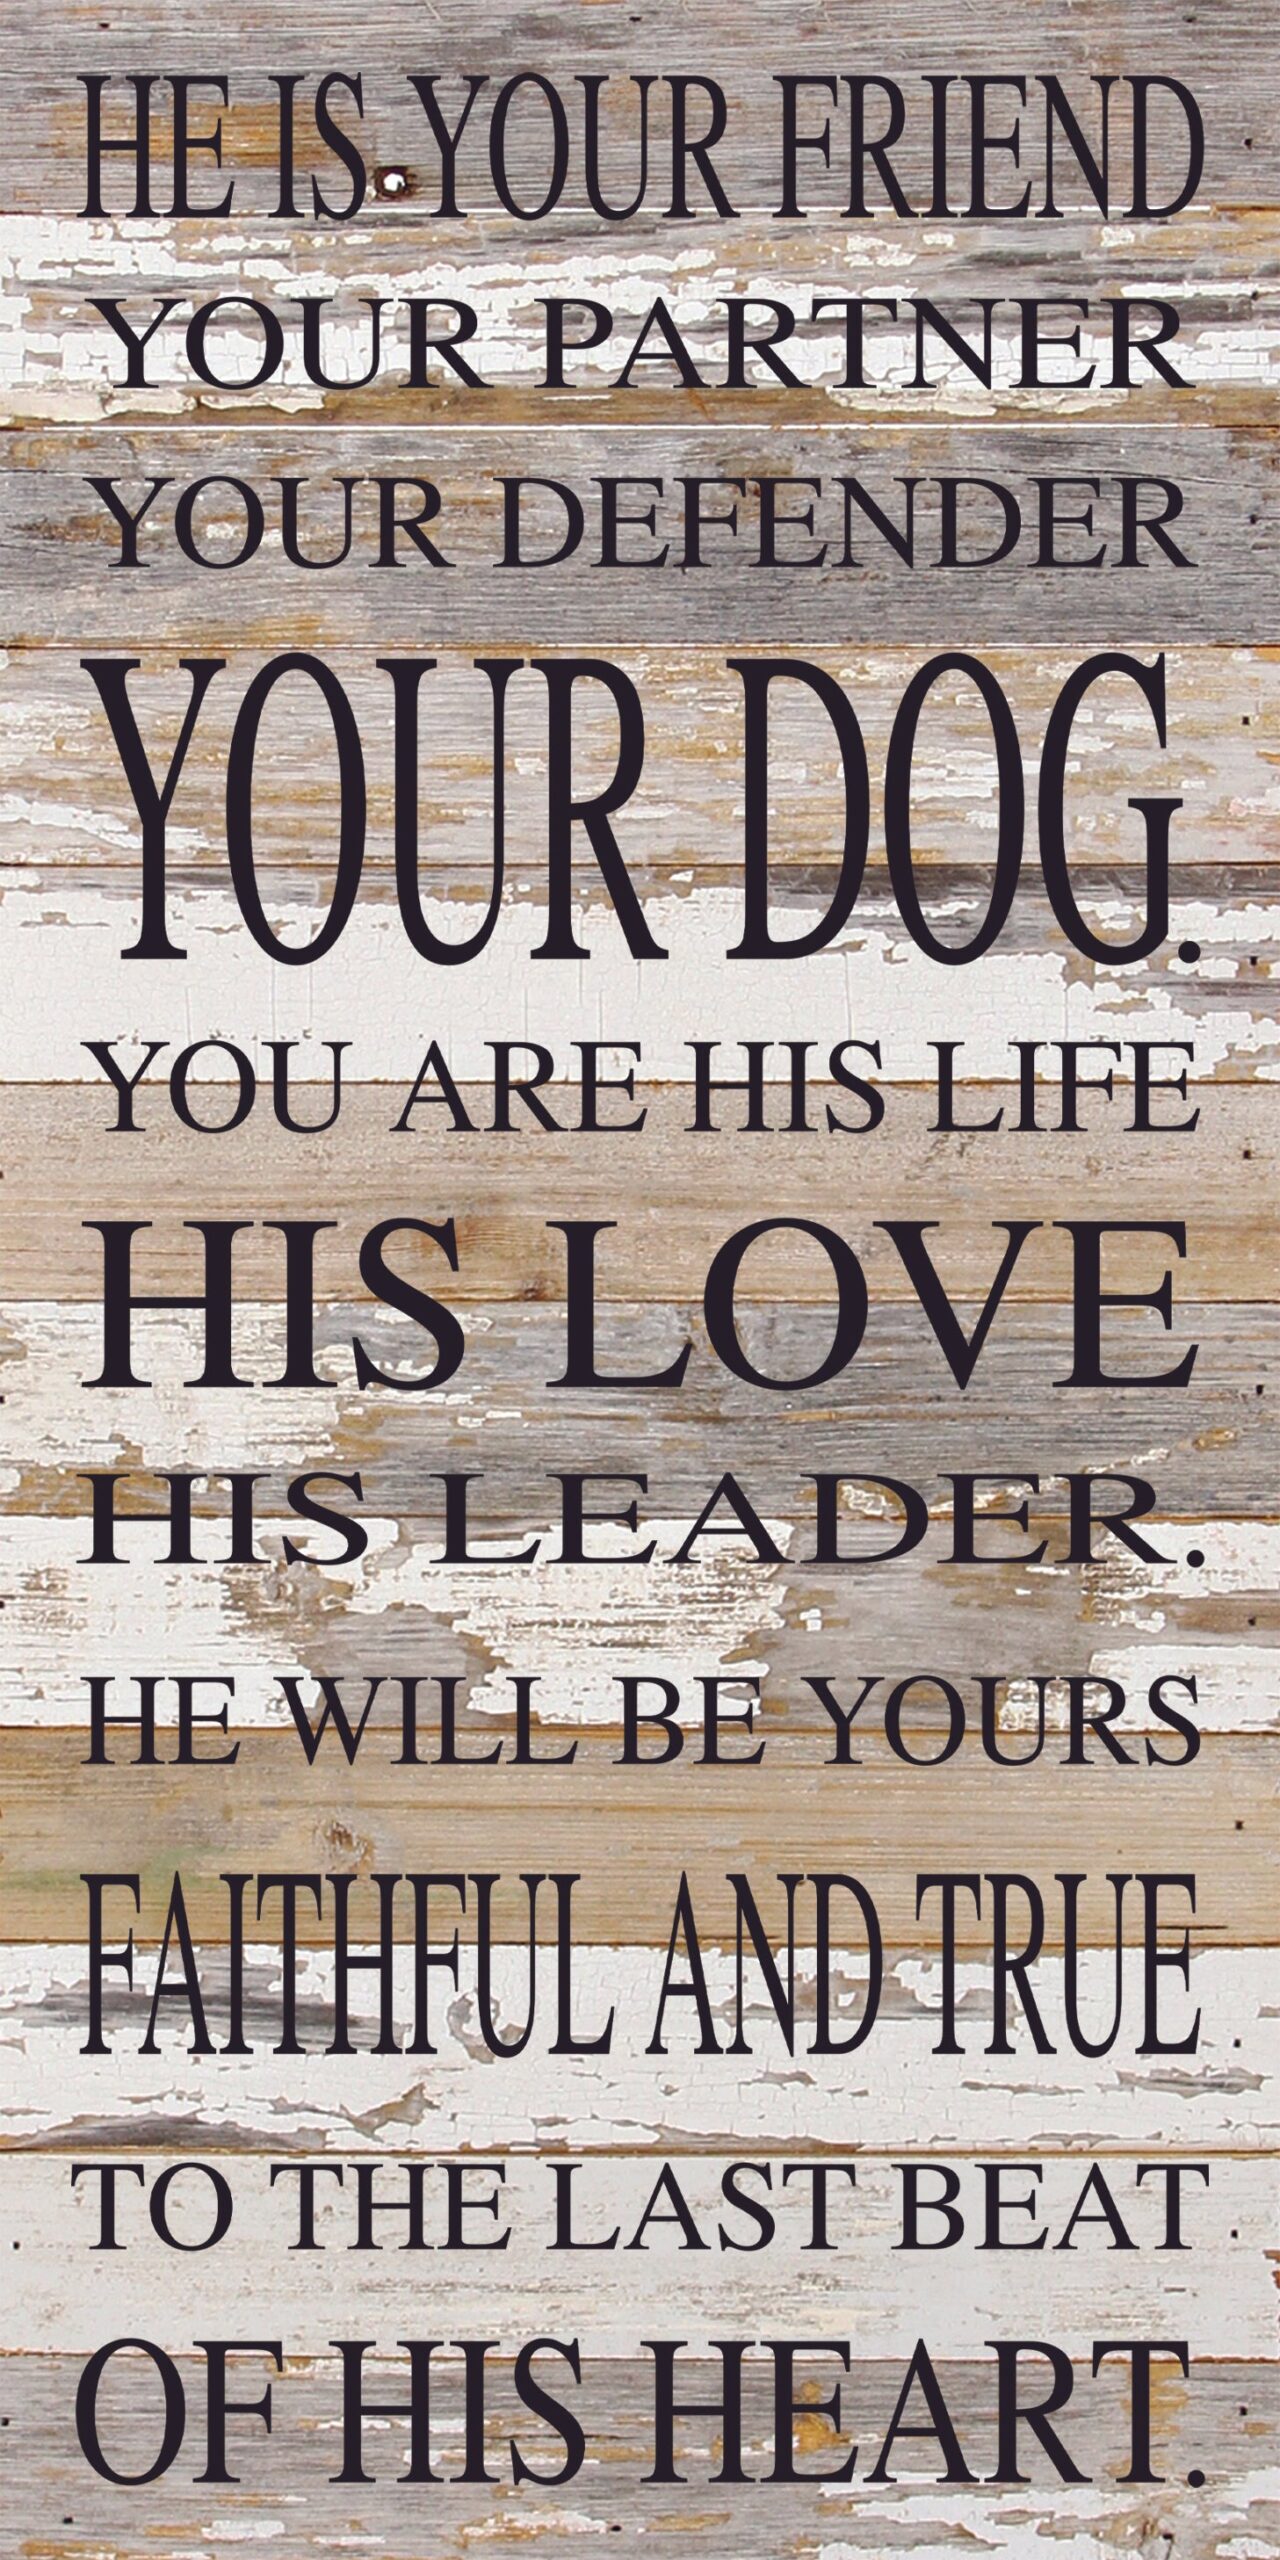 He is your friend, your partner, your defender, your dog. You are his life, his love, his leader. He will be yours, faithful and true, to the last beat of his heart. / 12"x24" Reclaimed Wood Sign